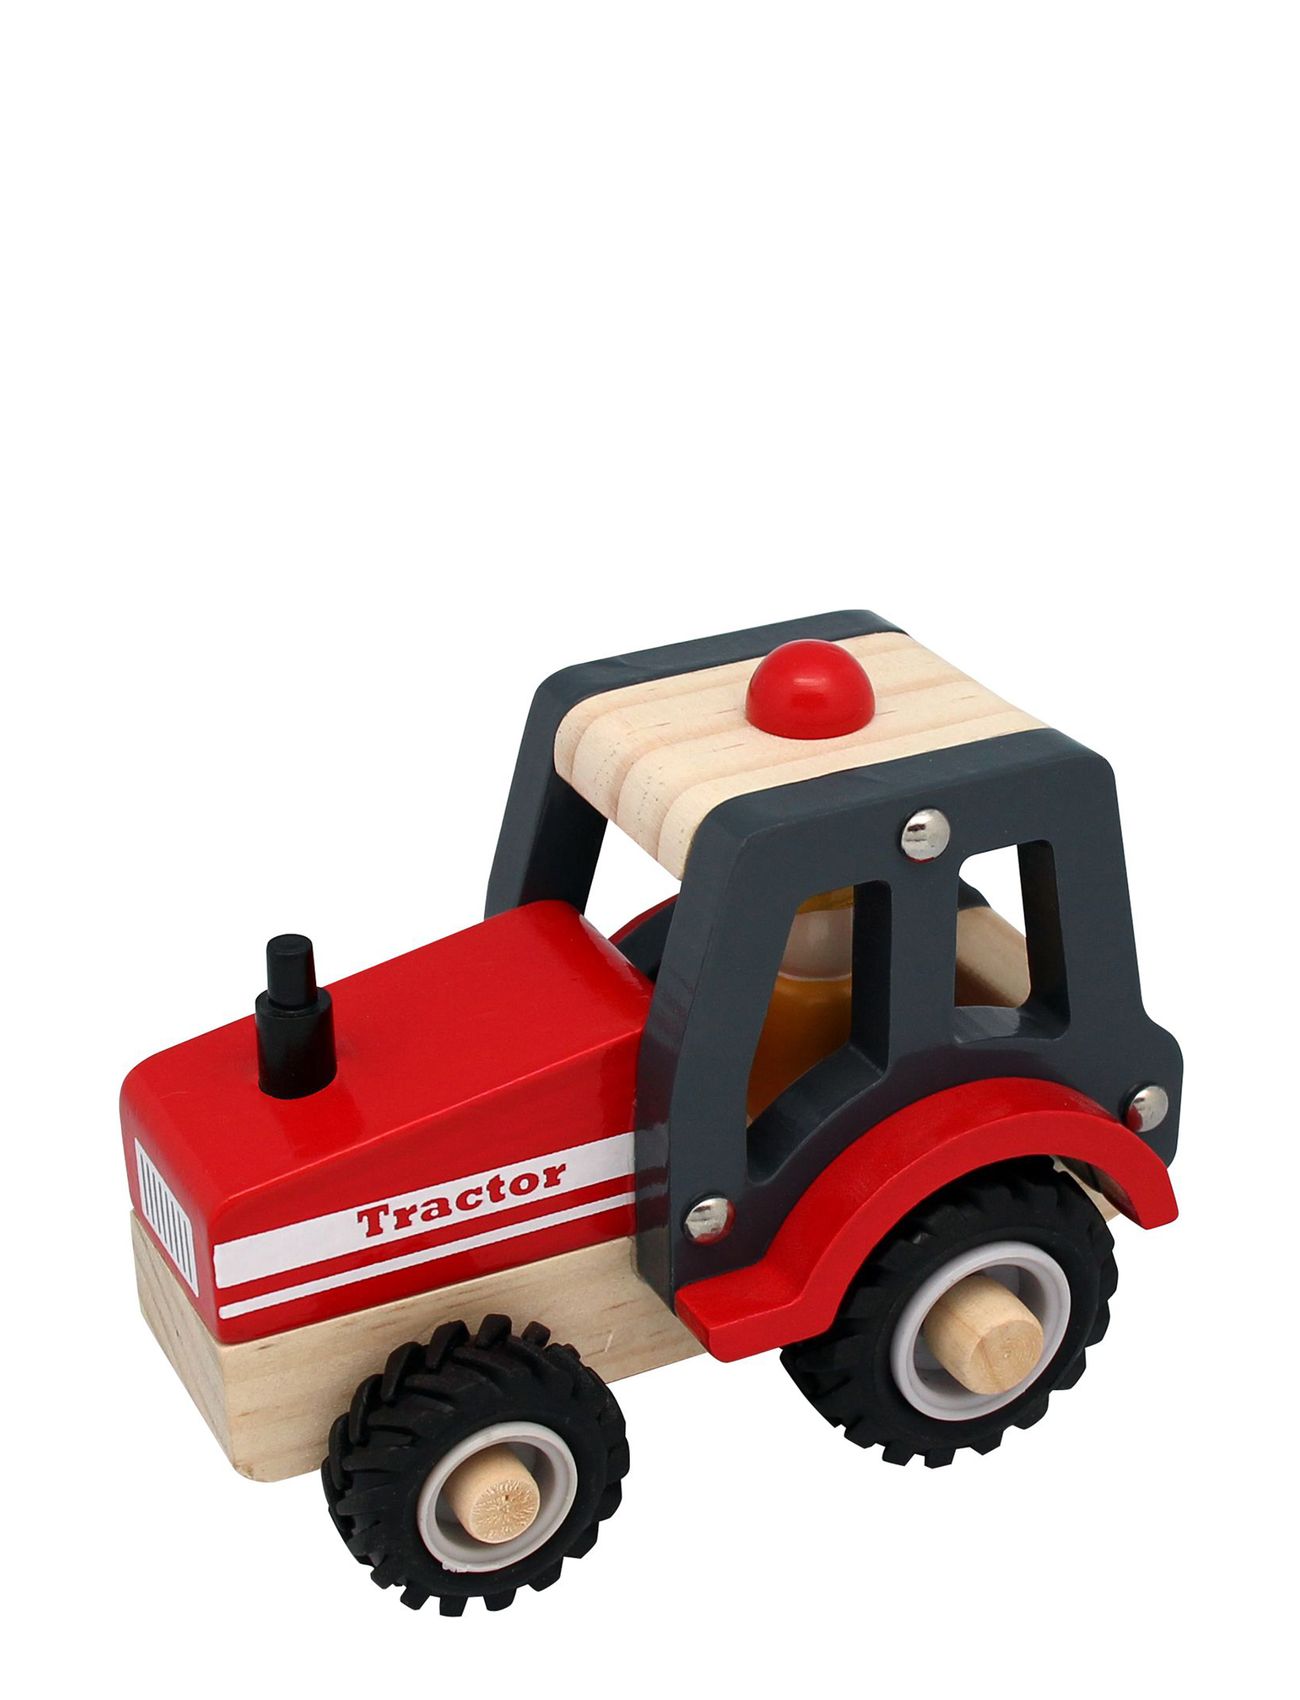 Wooden Tractor With Rubber Wheels Toys Toy Cars & Vehicles Toy Vehicles Tractors Red Magni Toys